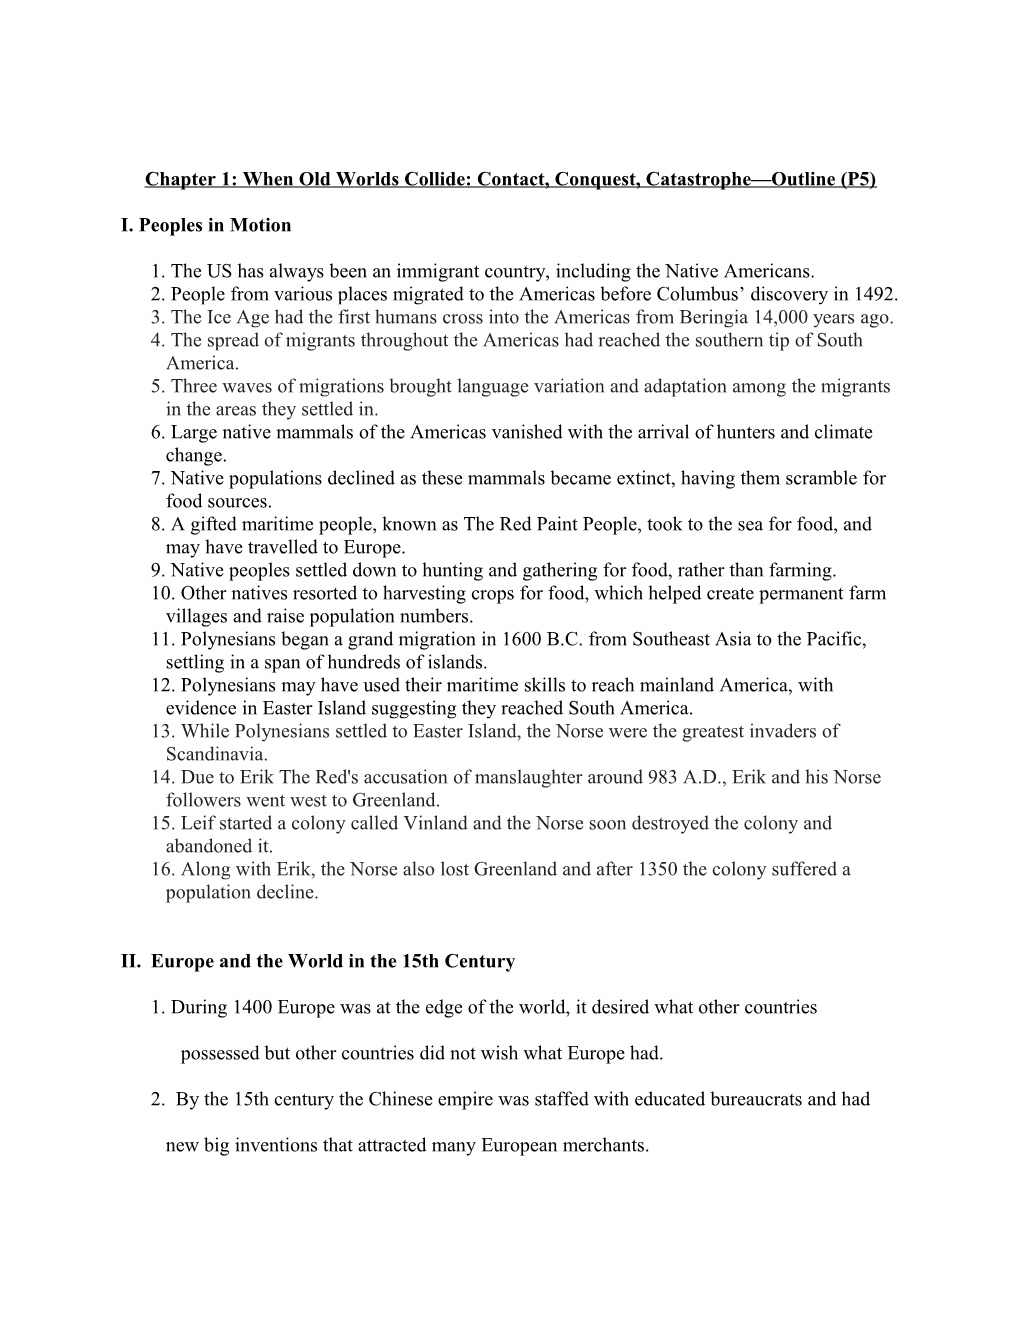 Chapter 1: When Old Worlds Collide: Contact, Conquest, Catastrophe Outline (P5)